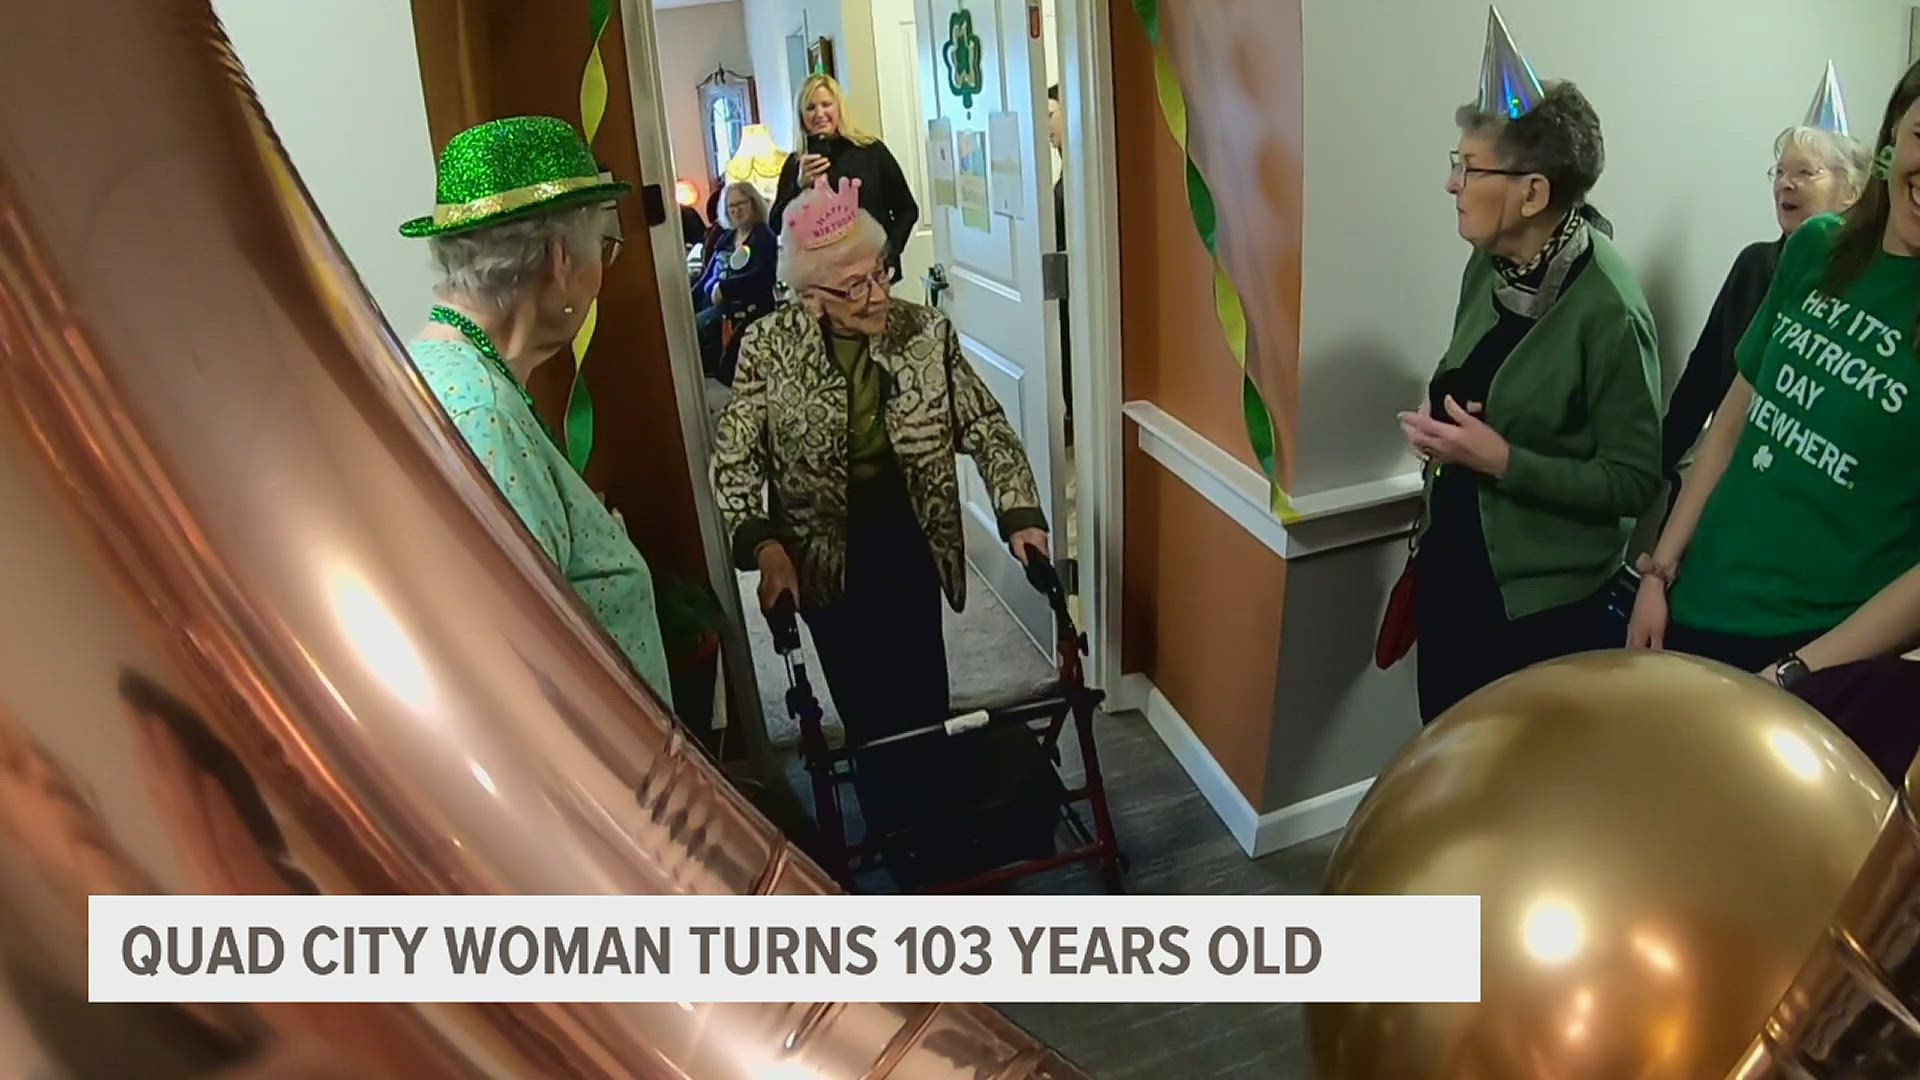 Marian Kent turned 103 years old Friday at Overlook Village Senior Living facility in Moline.